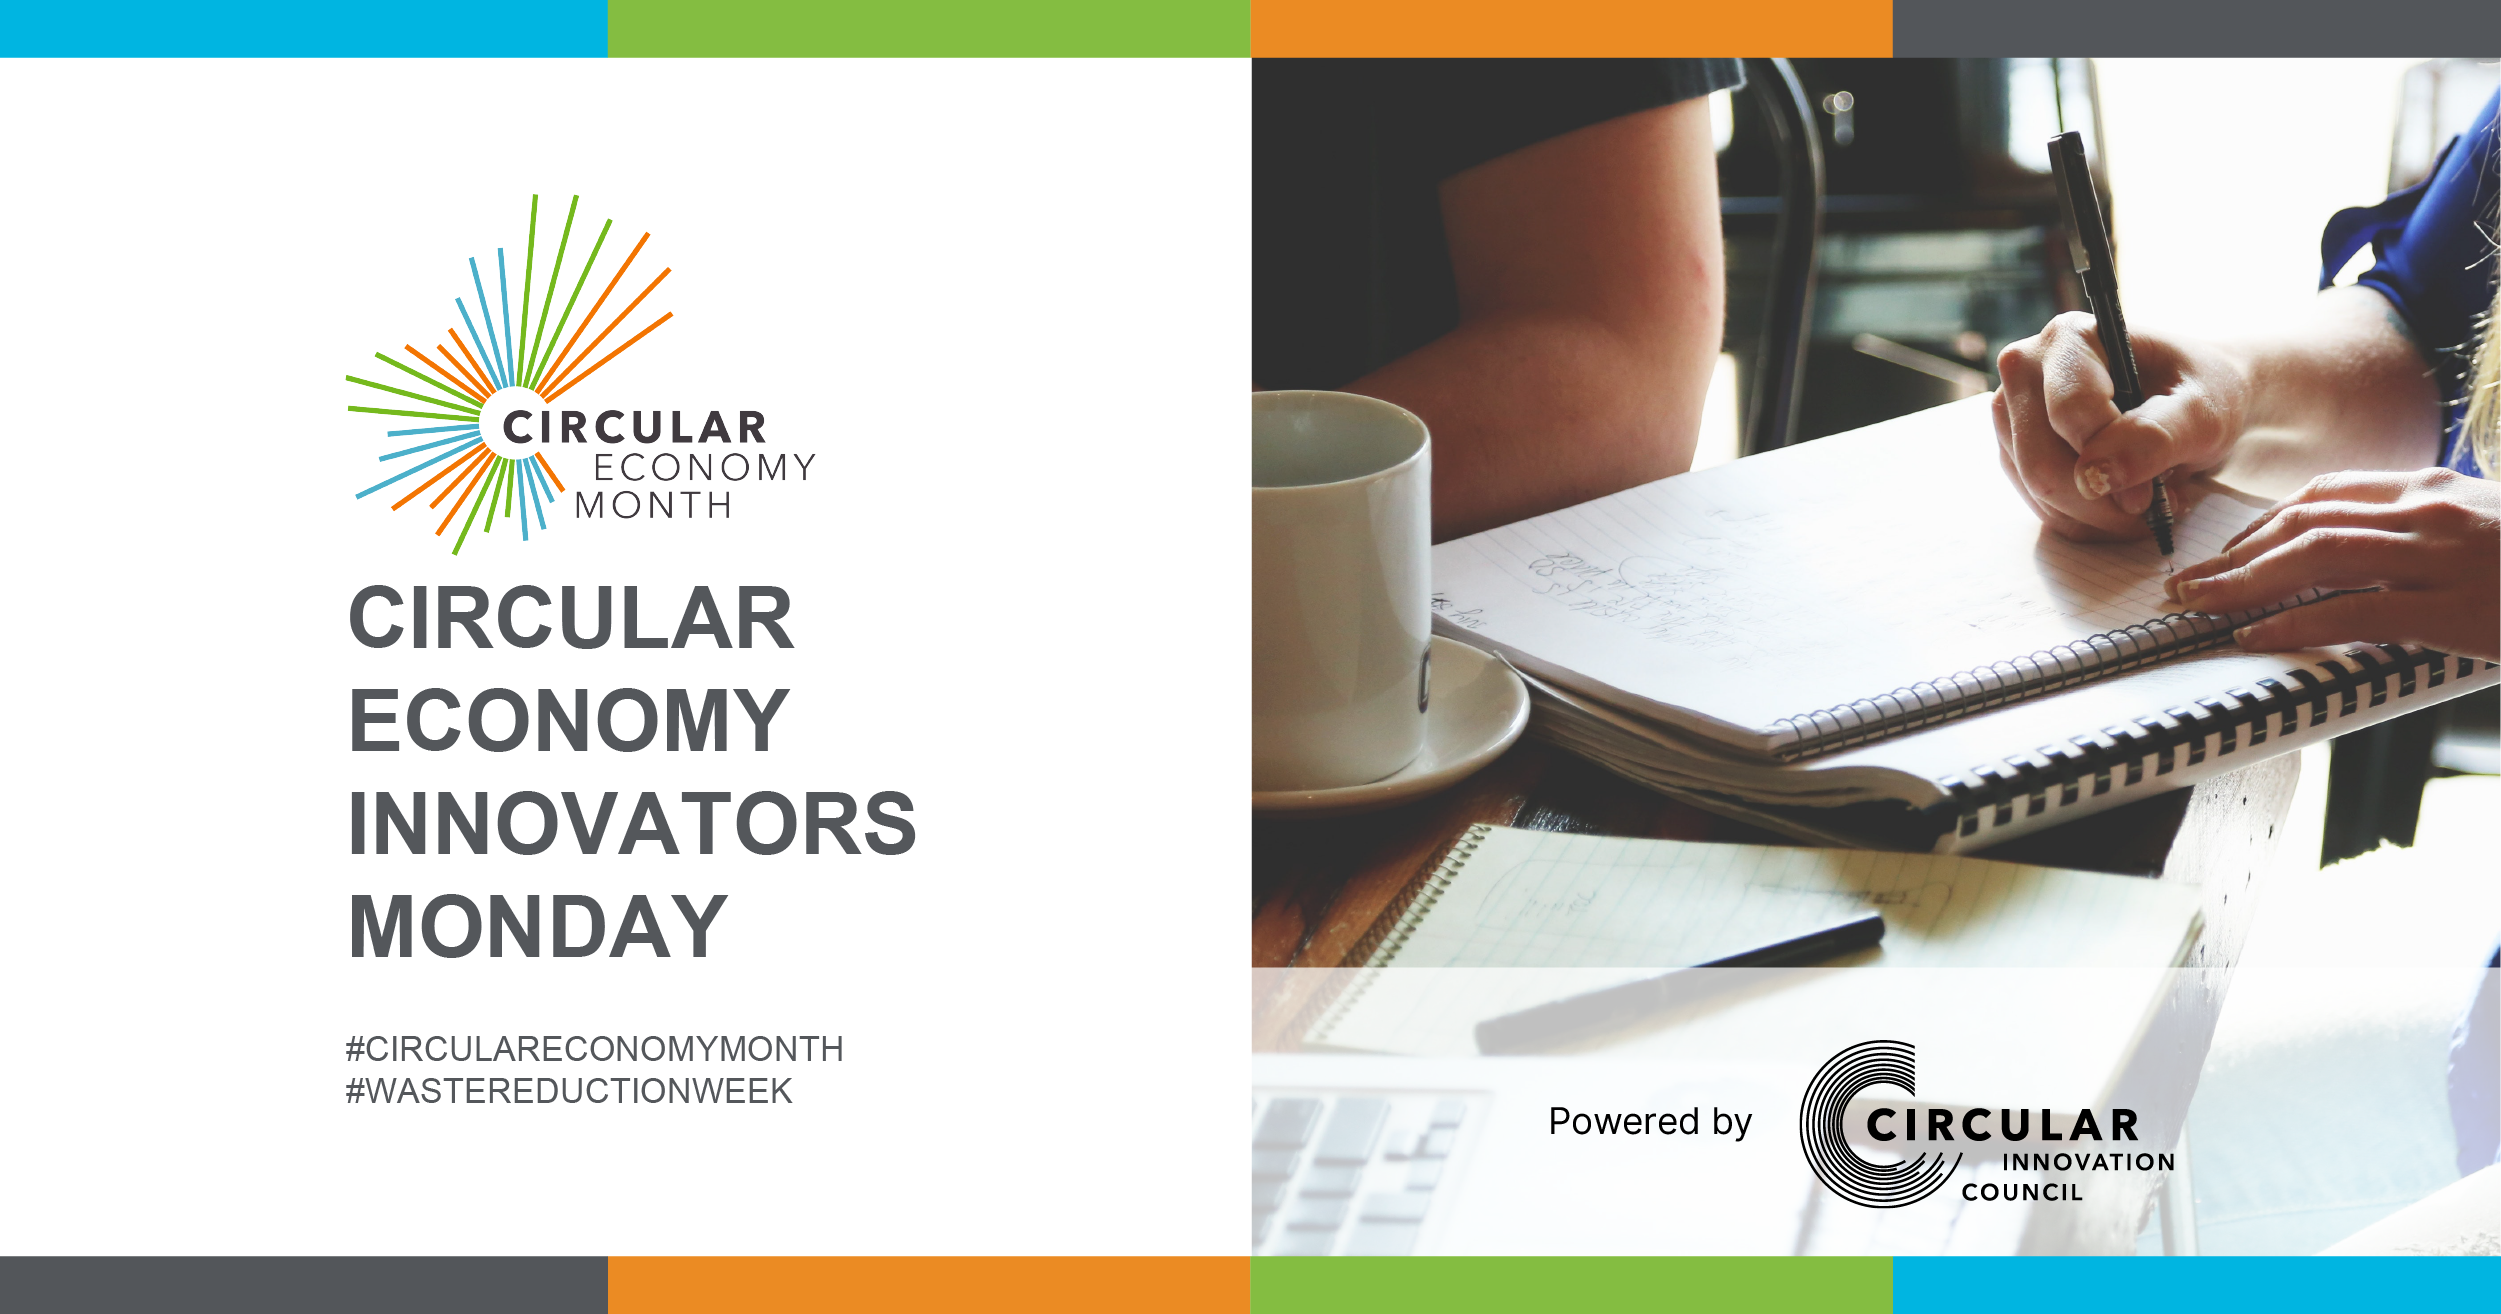 A person sitting at a table writes in a notebook. Circular Economy Innovators Monday #CircularEconomyMonth #WasteReductionWeek. Circular Economy Month, powered by Circular Innovation Council.